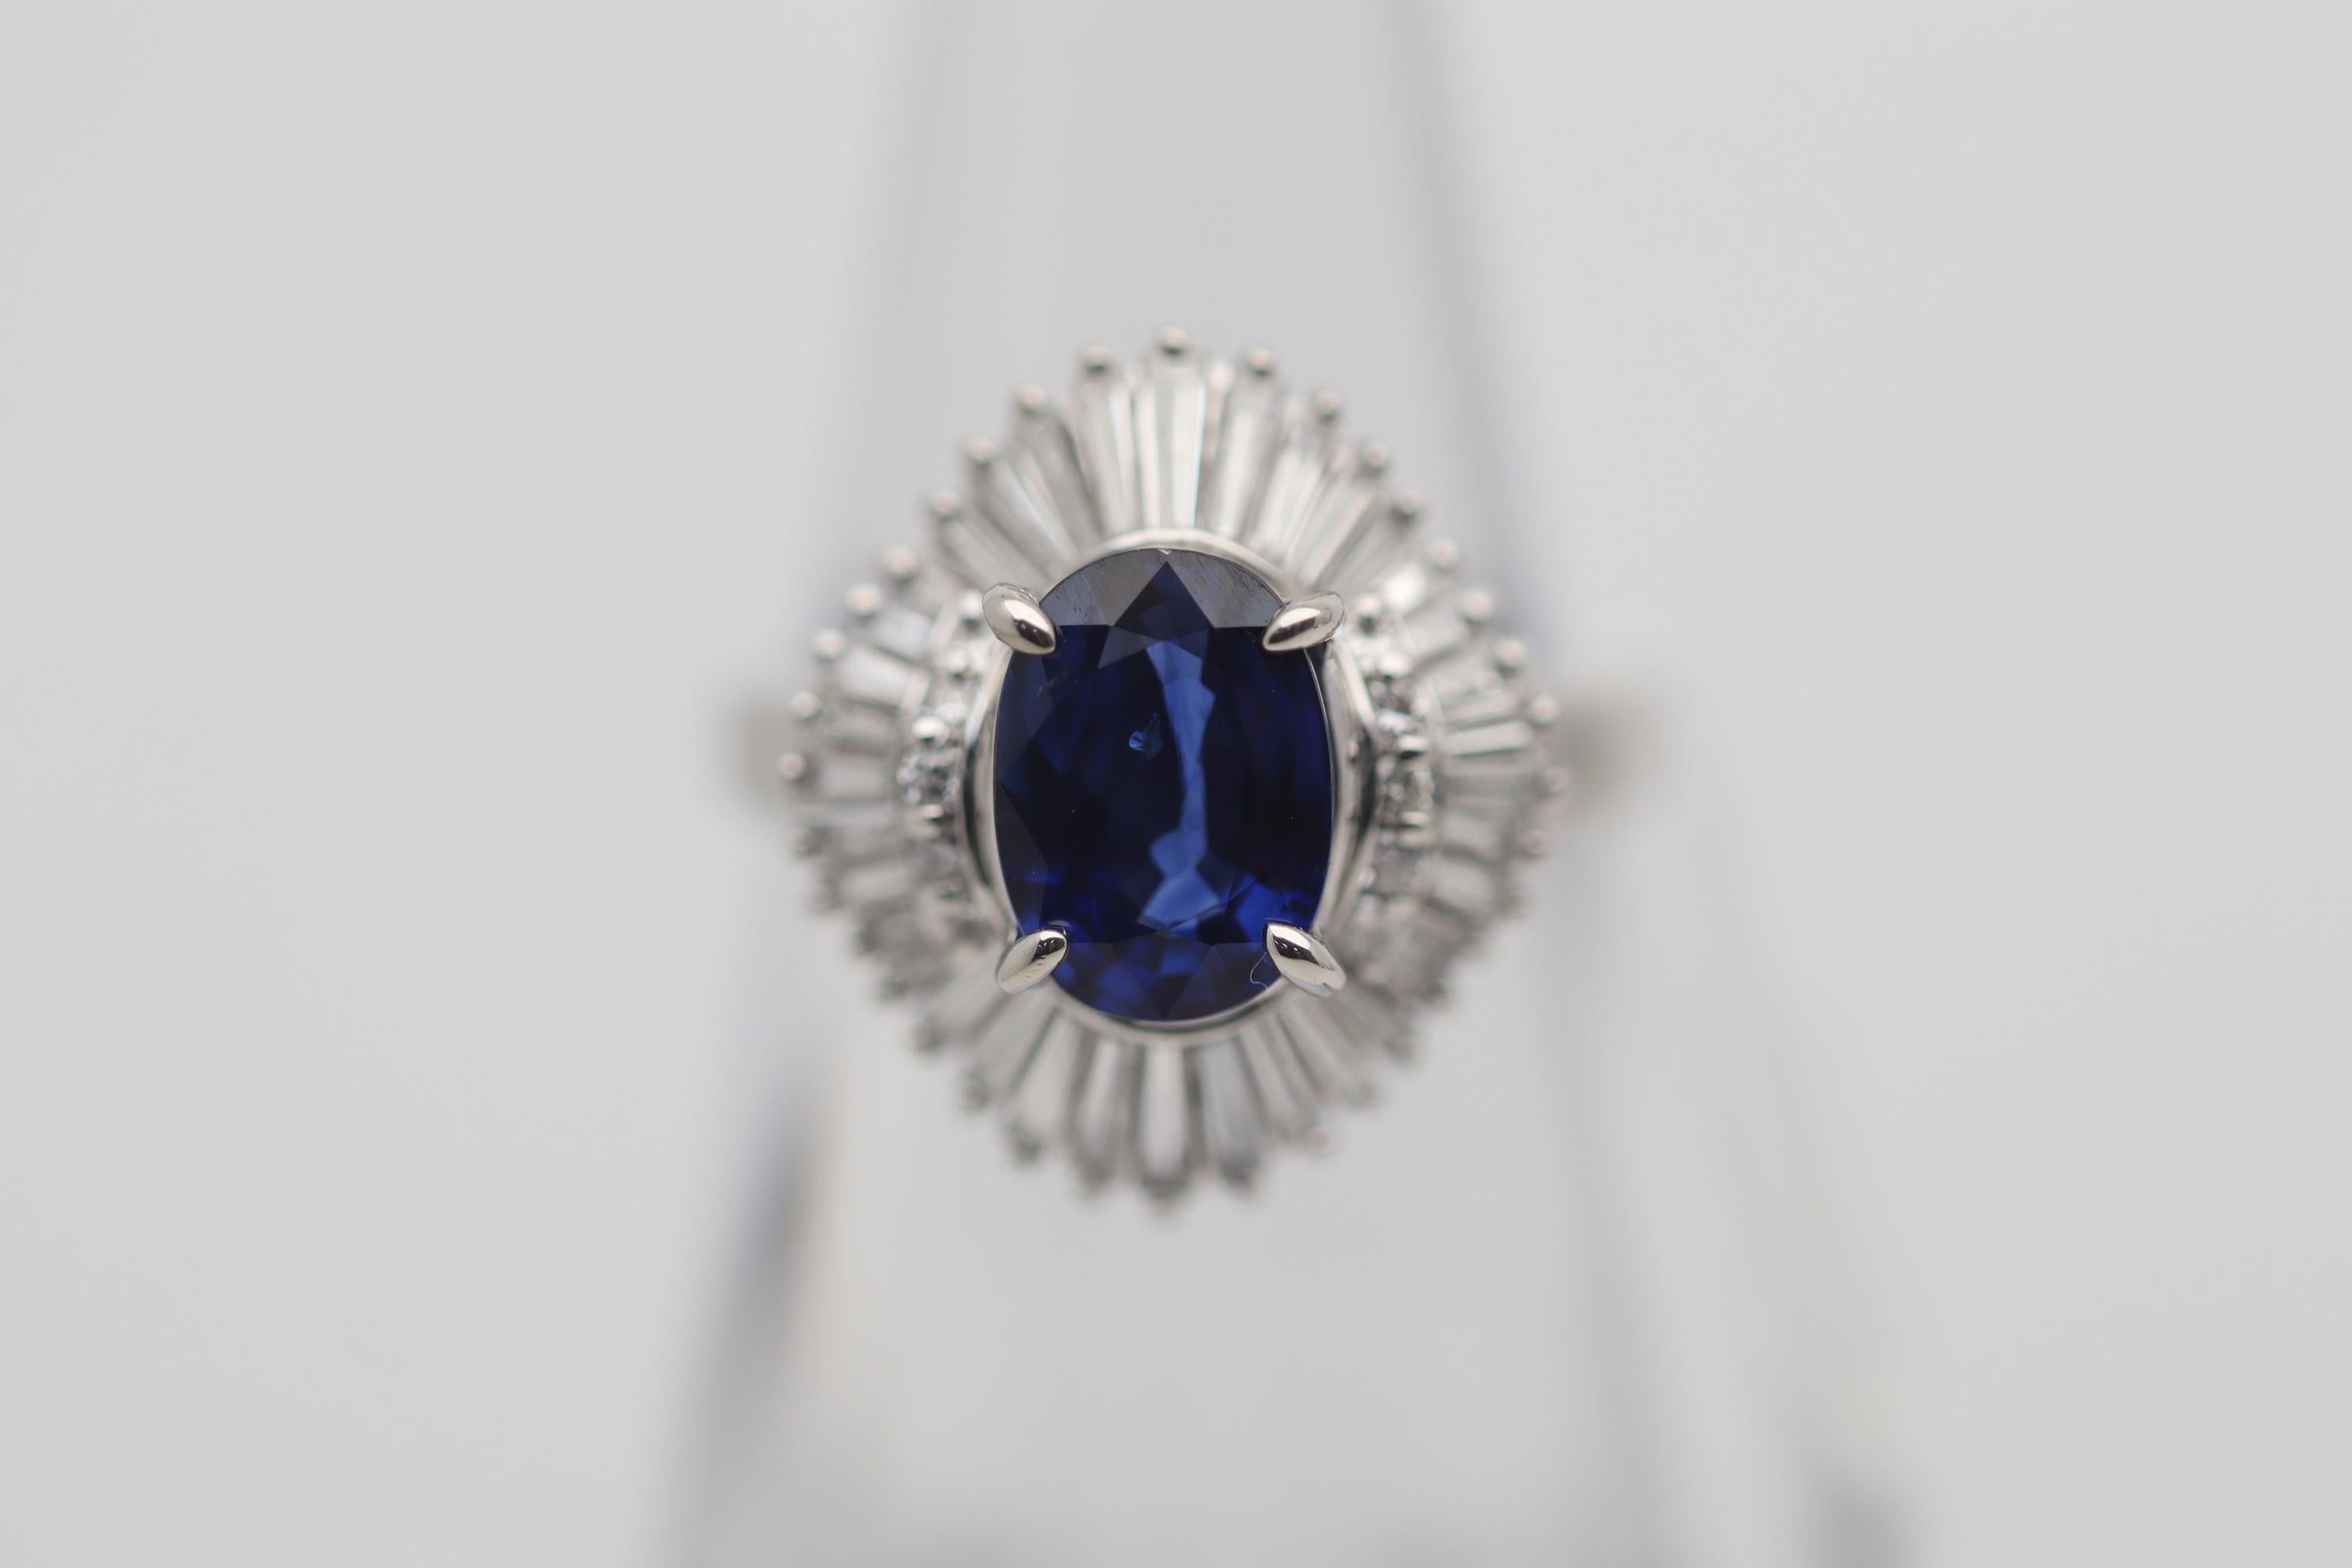 A sweet and stylish ring featuring a 2.03 carat oval-shape sapphire with a fine rich blue color and great brightness. It is surrounded by 1.05 carats of round brilliant and baguette-cut diamonds set in a ballerina style around the gem.